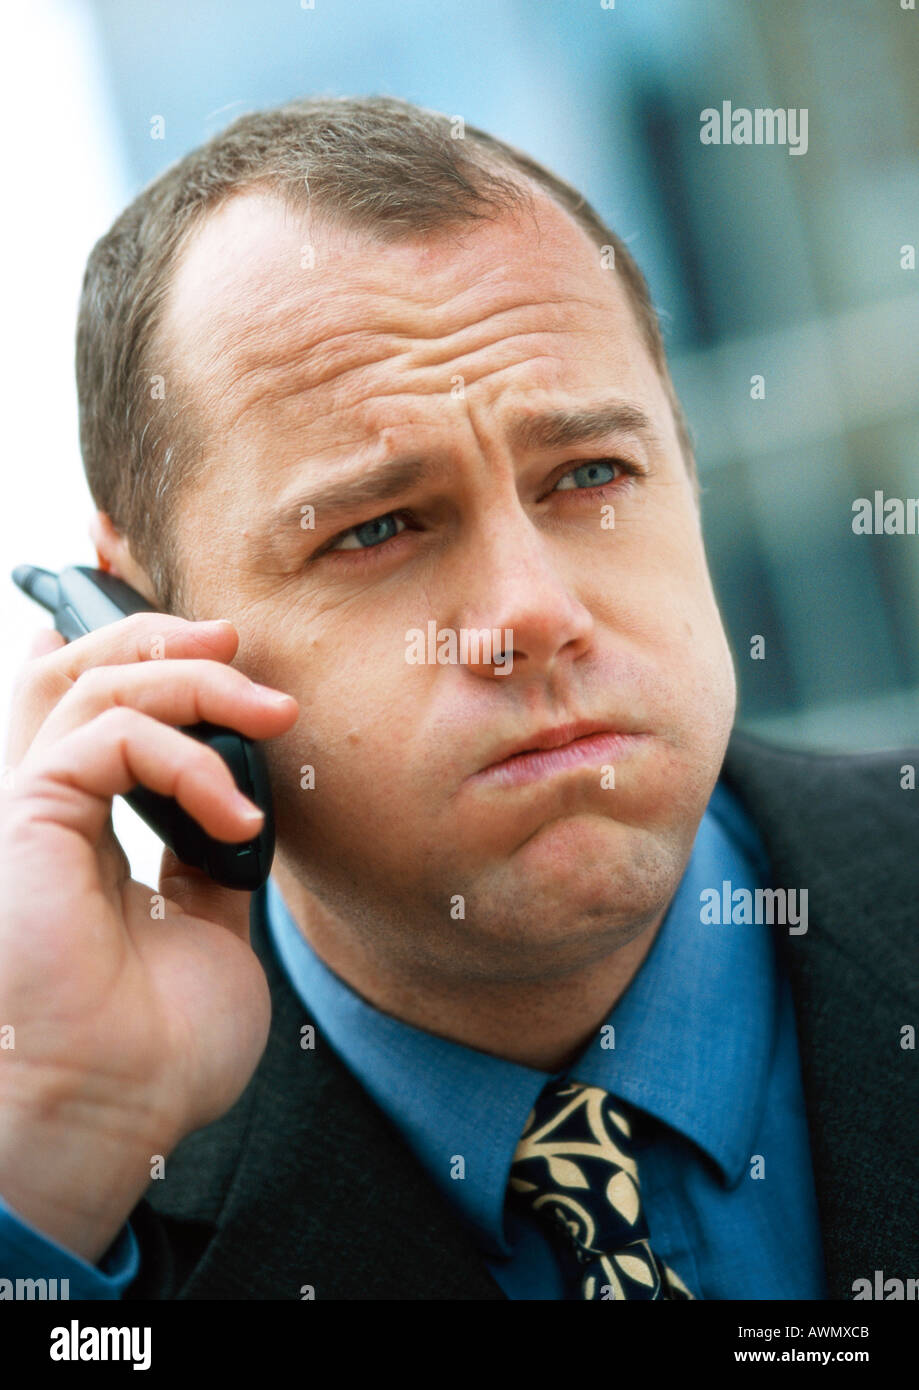 Businessman using cellular phone, puffing out cheeks and furrowing brow, portrait, close-up. Stock Photo